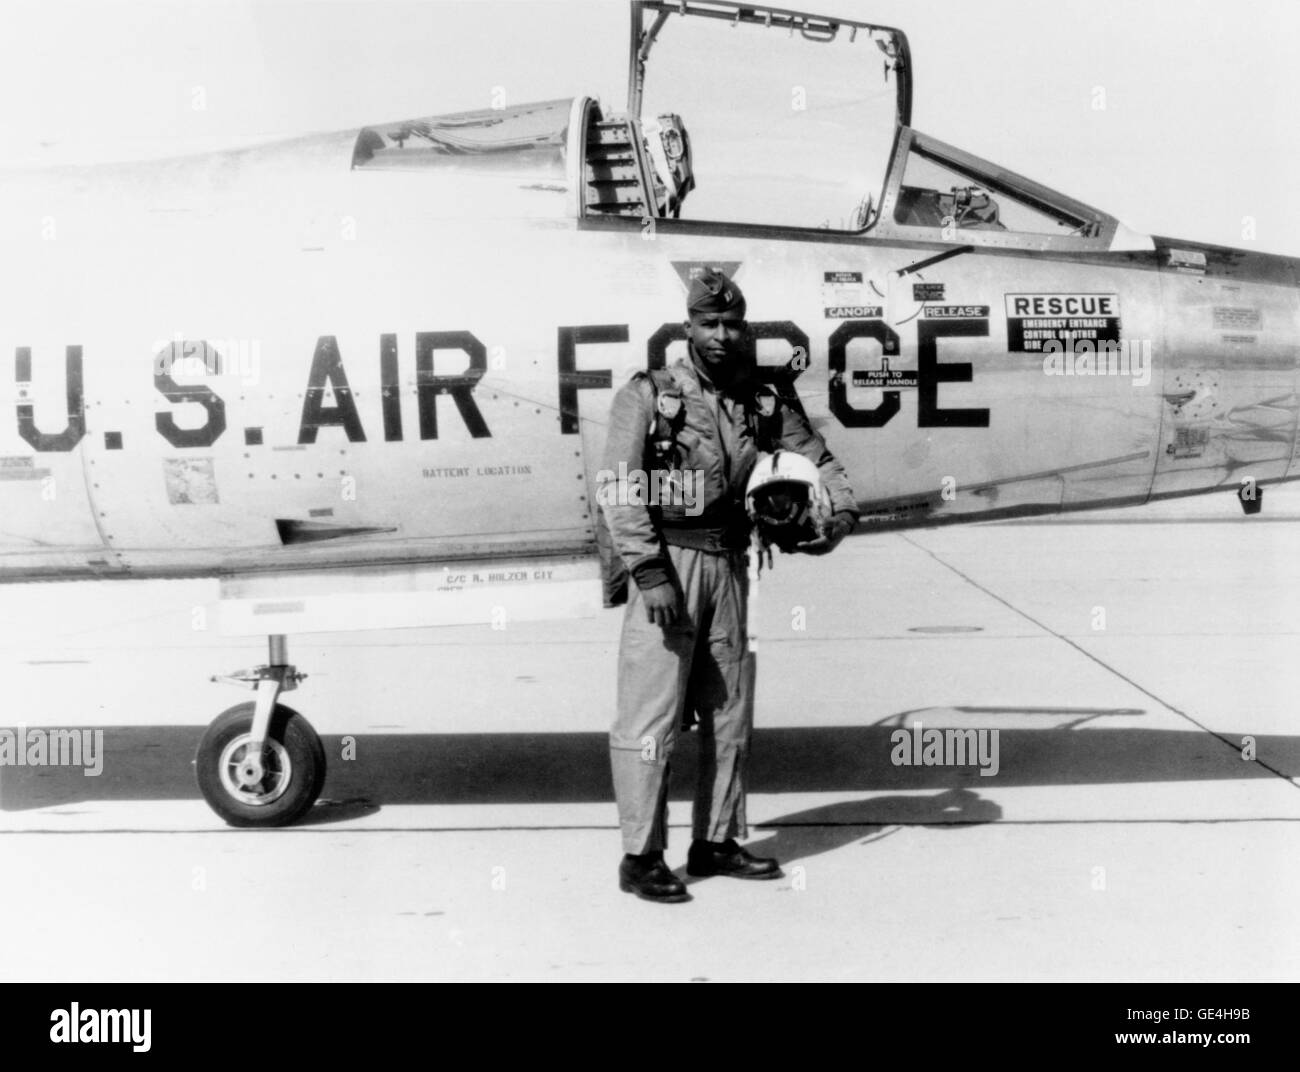 Robert H. Lawrence, Jr., a Captain in the United States Air Force, was chosen for the Manned Orbital Laboratory (MOL), Group III, in 1967, becoming the first African American astronaut candidate. Lawrence died December 8, 1967, in the crash of an F-104 at Edwards Air Force Base, California, with the rank of Major.  Image #: S97-12374 Date: 1967 Stock Photo